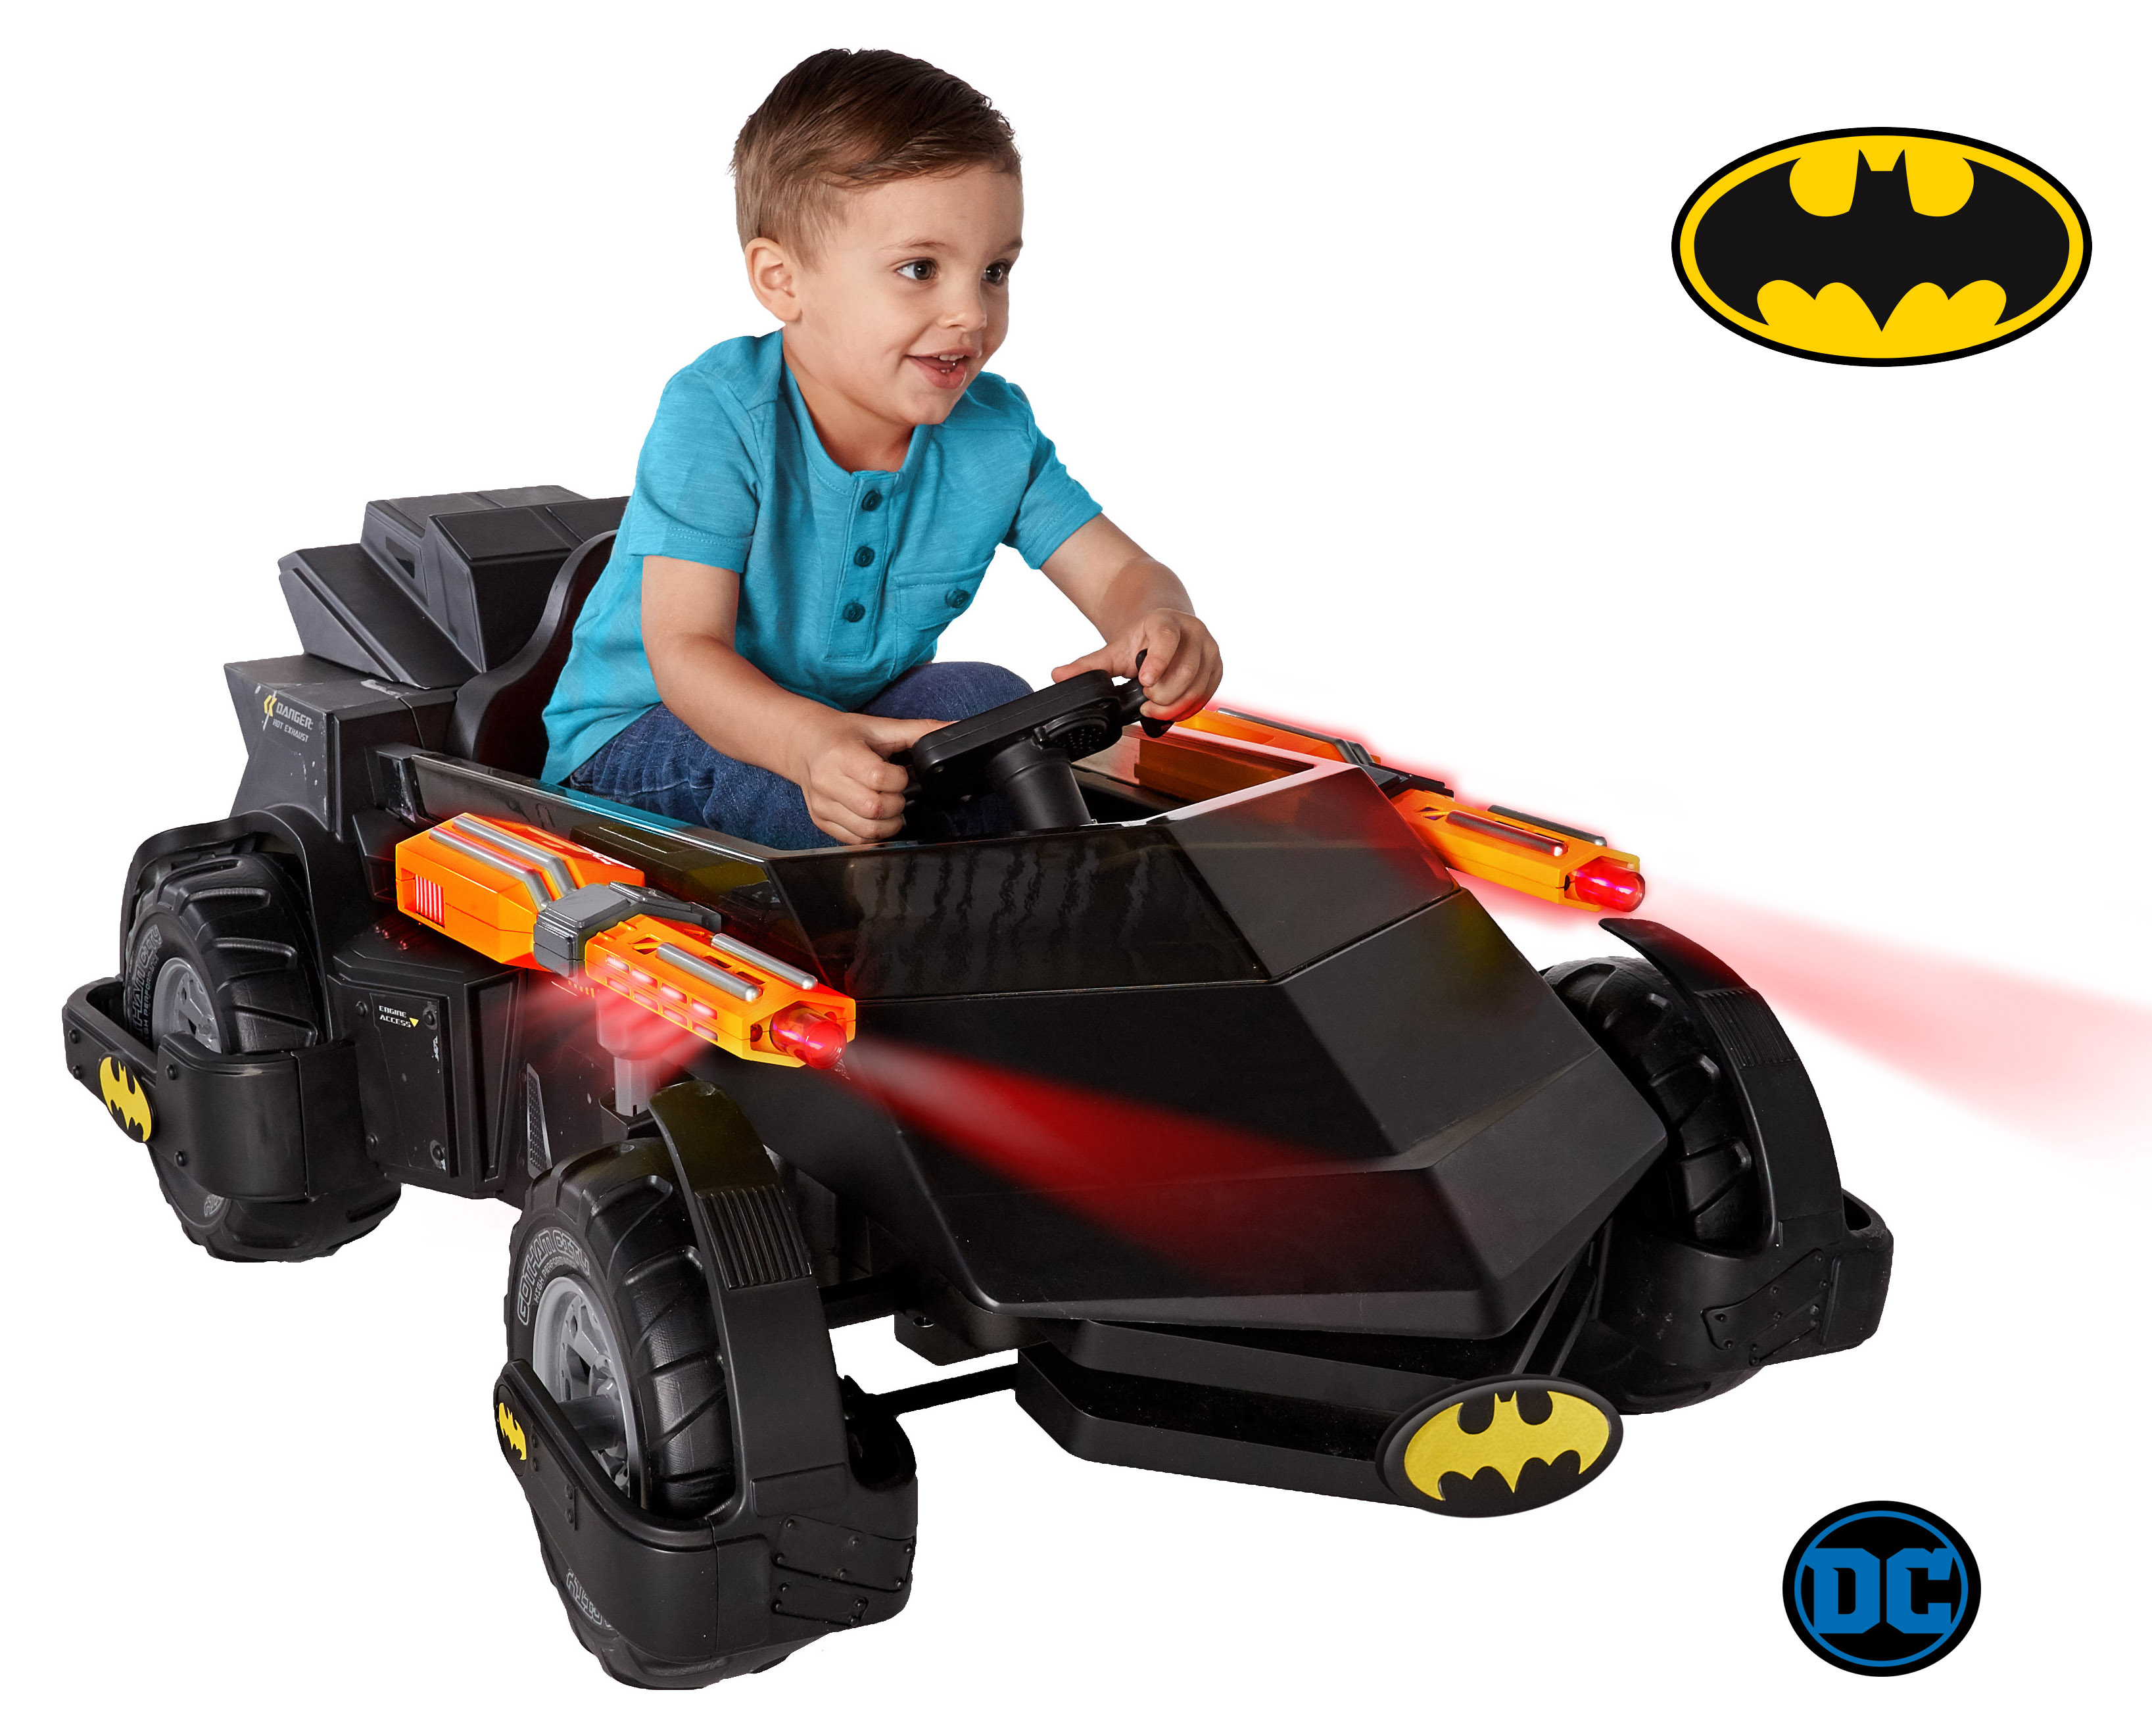 6 Volt DC Comics Batman Batmobile Battery Powered Ride-on - Features Light up Cannons and Sounds! - image 2 of 12